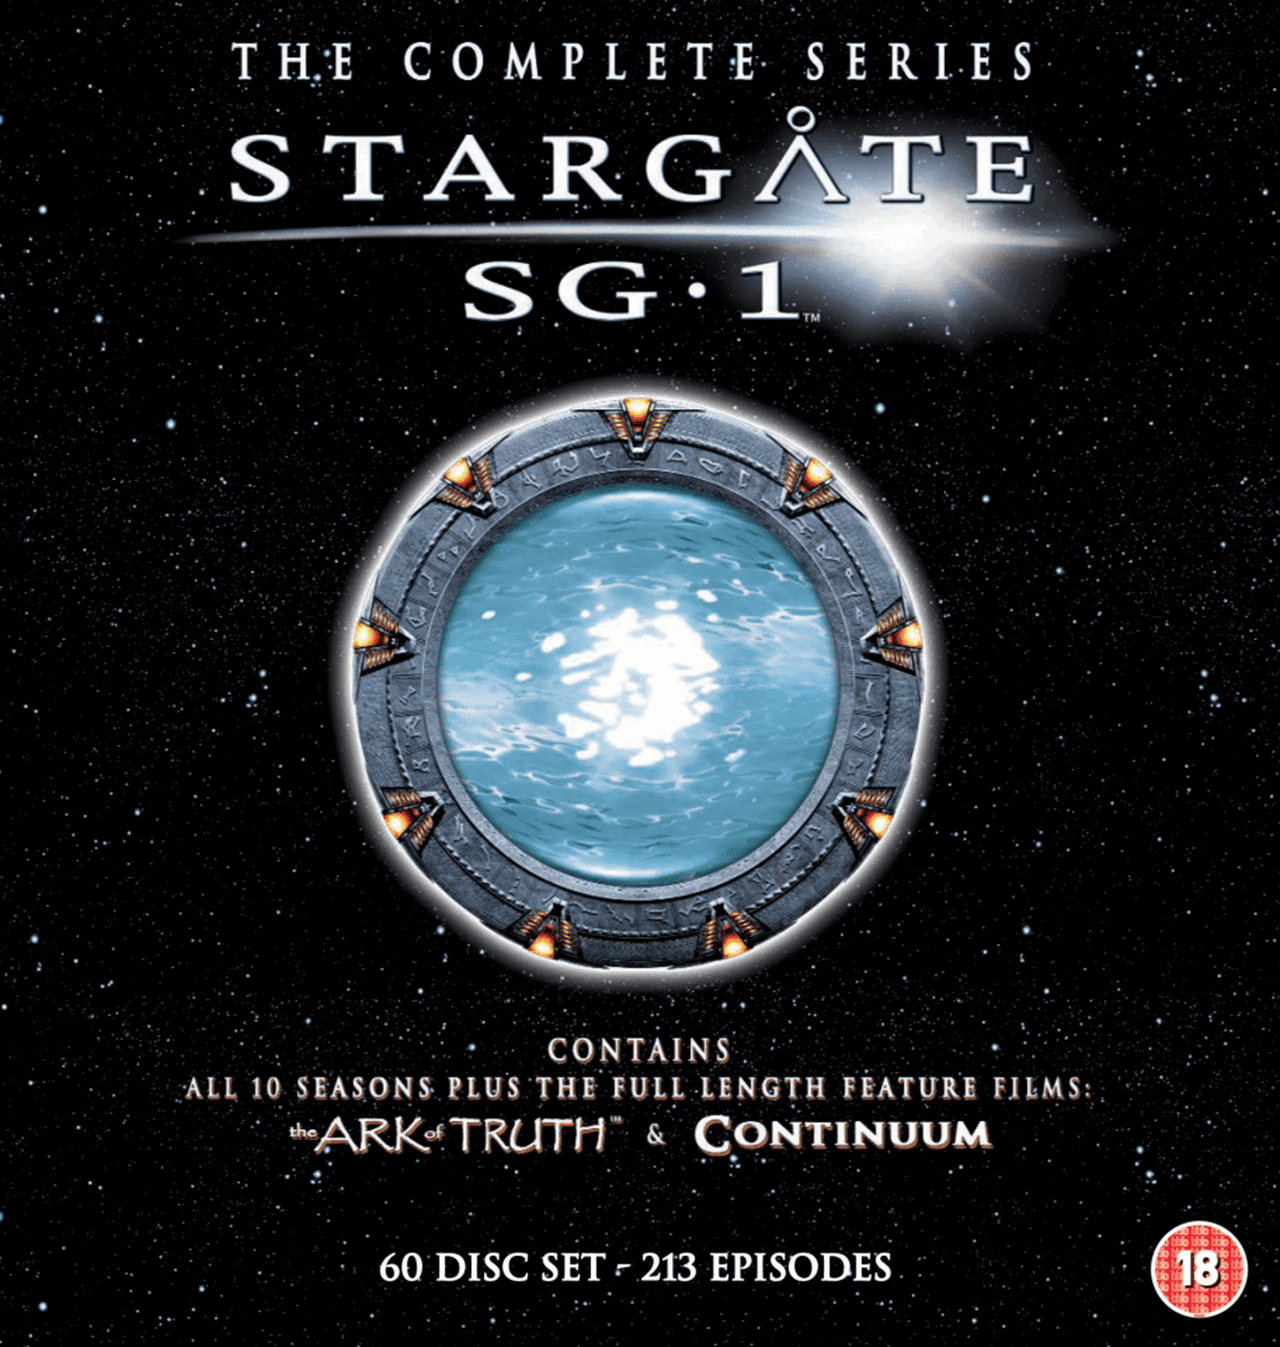 Stargate Sg The Complete Series Dvd Box Set Free Shipping Over Hmv Store